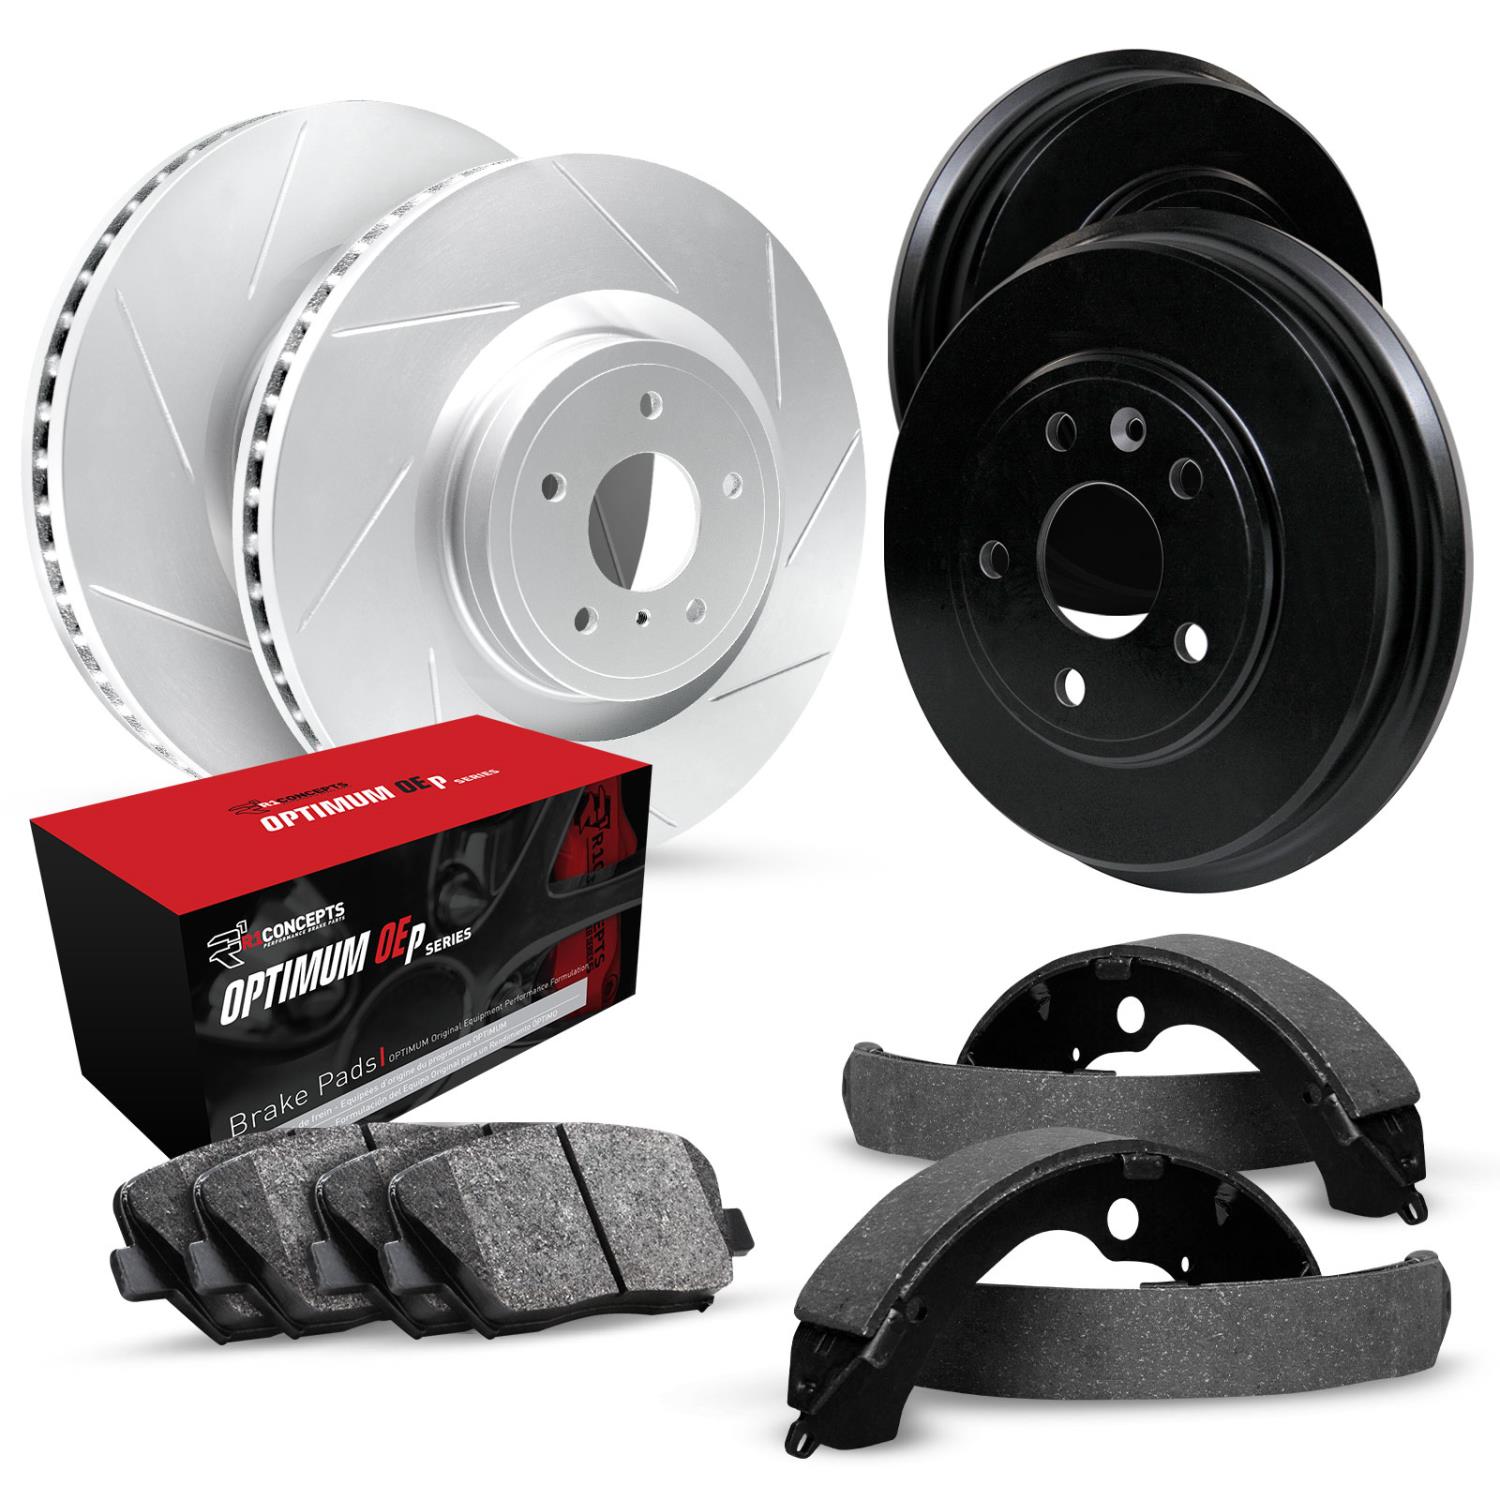 GEO-Carbon Slotted Brake Rotor & Drum Set w/Optimum OE Pads & Shoes, 2003-2005 Lexus/Toyota/Scion, Position: Front & Rear